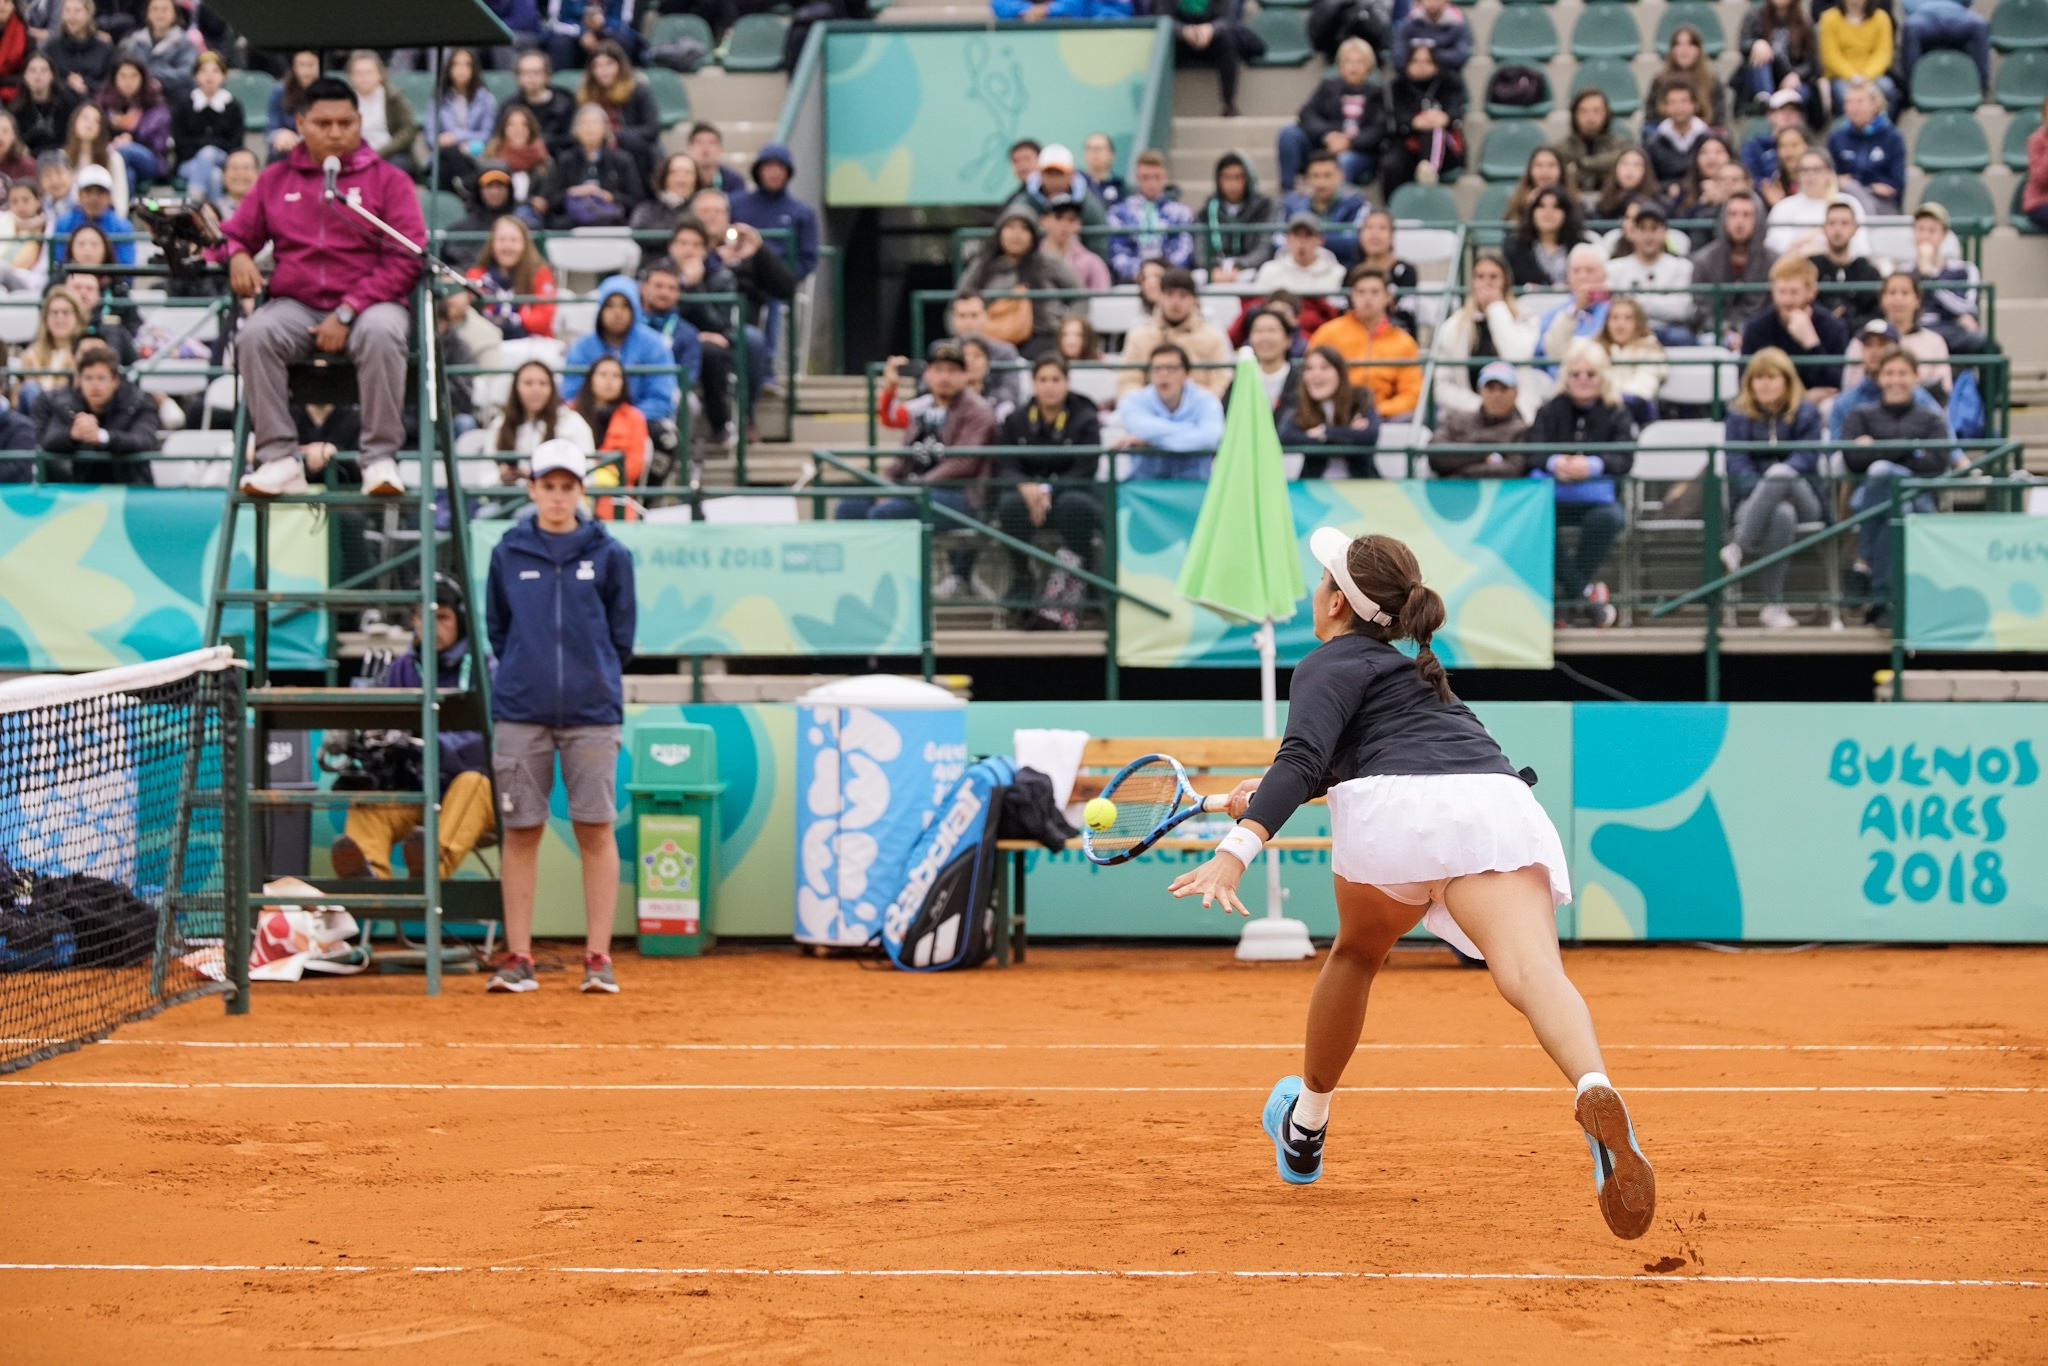 The men's and women's tennis tournaments have reached the business end ©Buenos Aires 2018